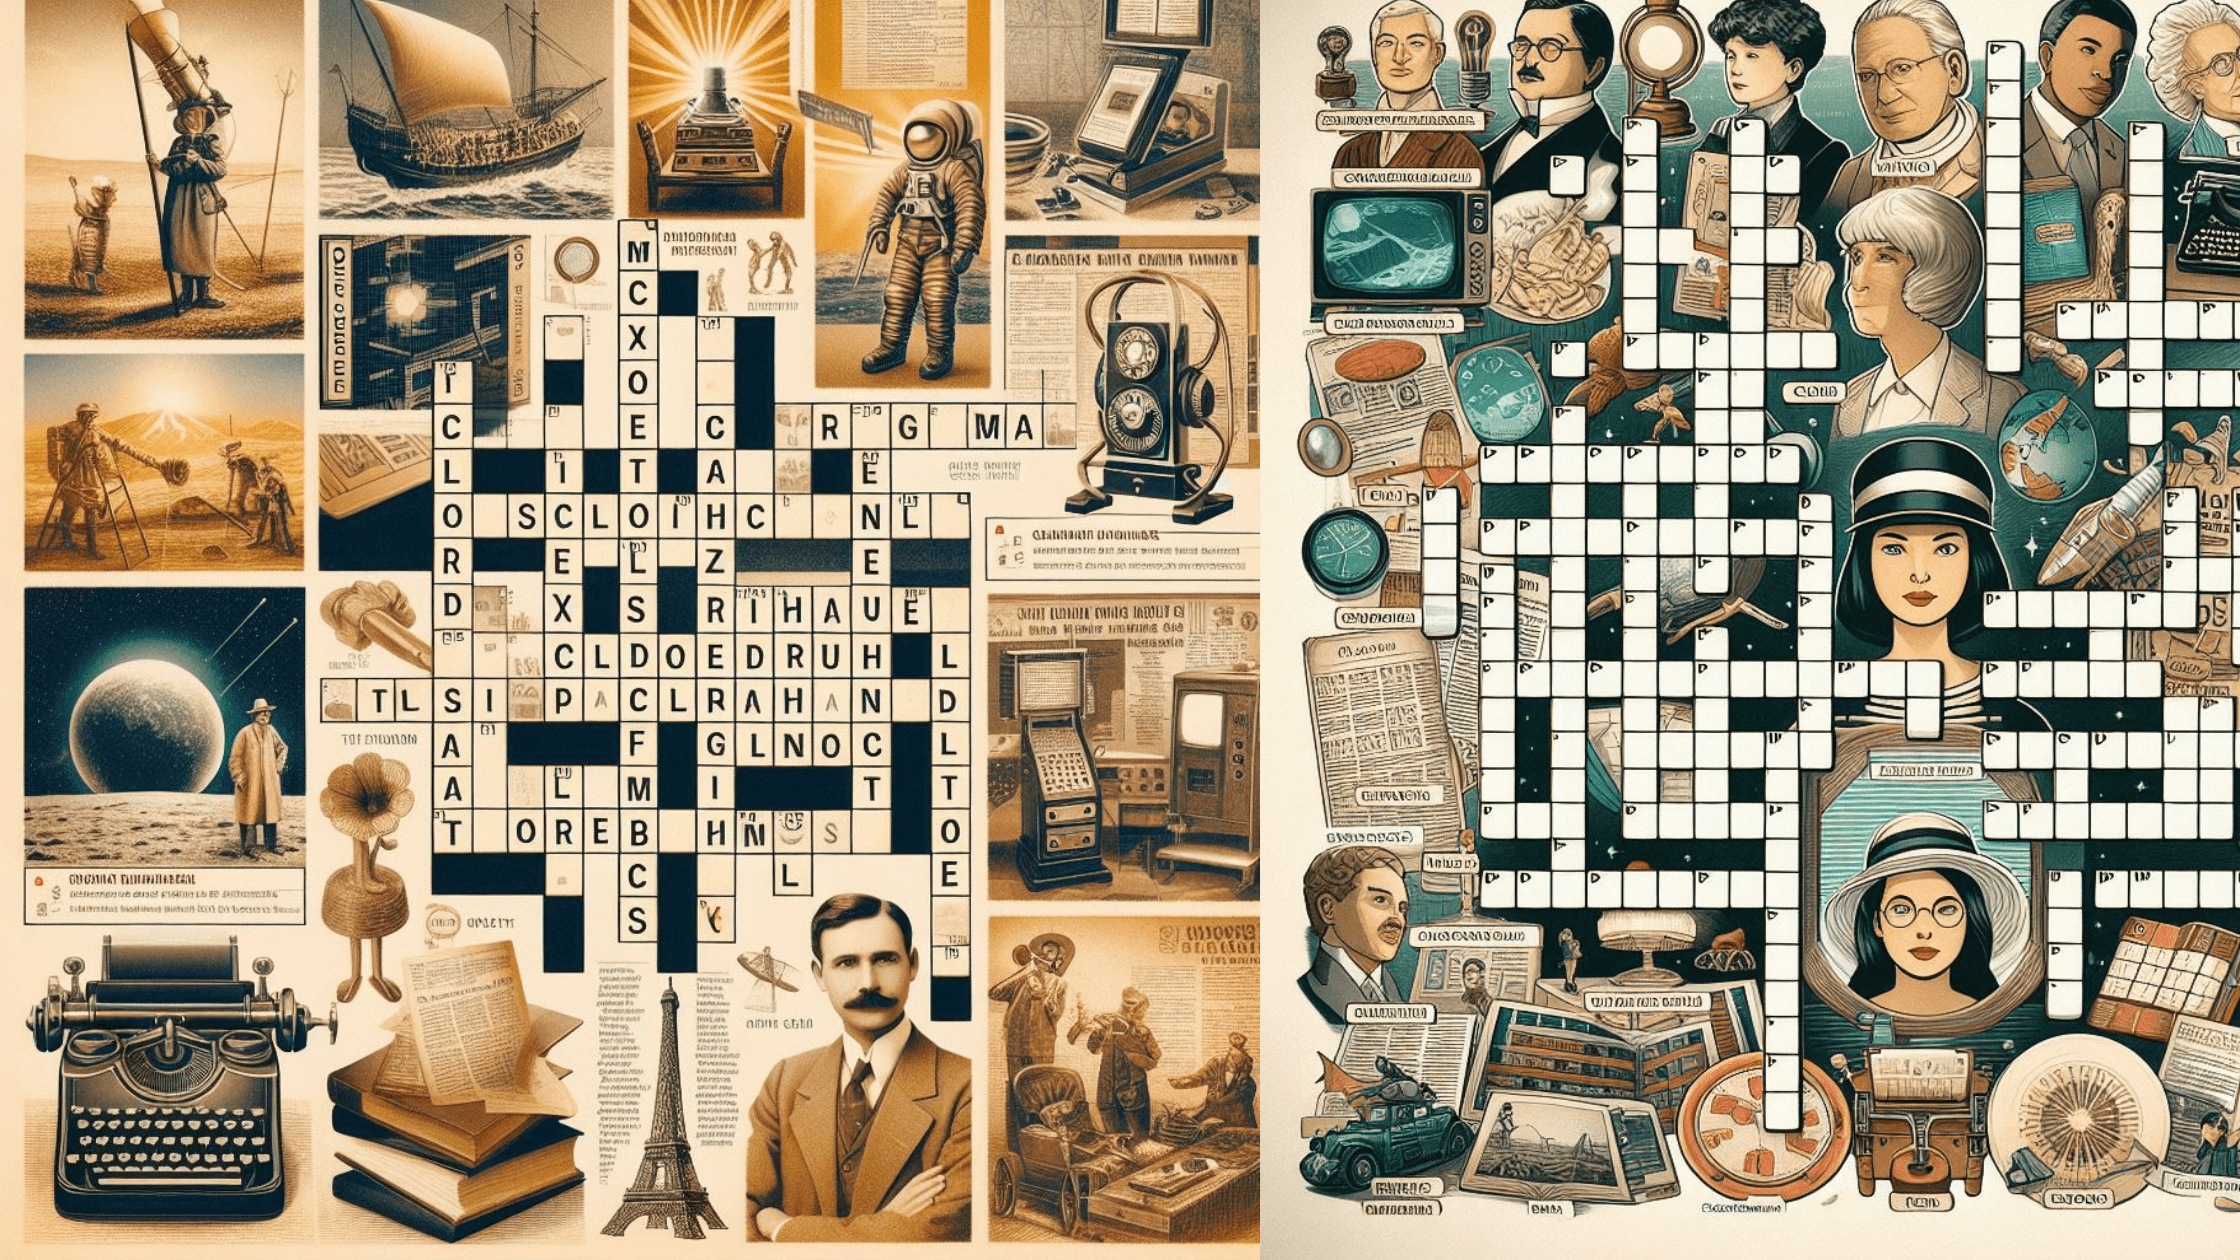 Solving Accomplishments in the Past Crossword Clues